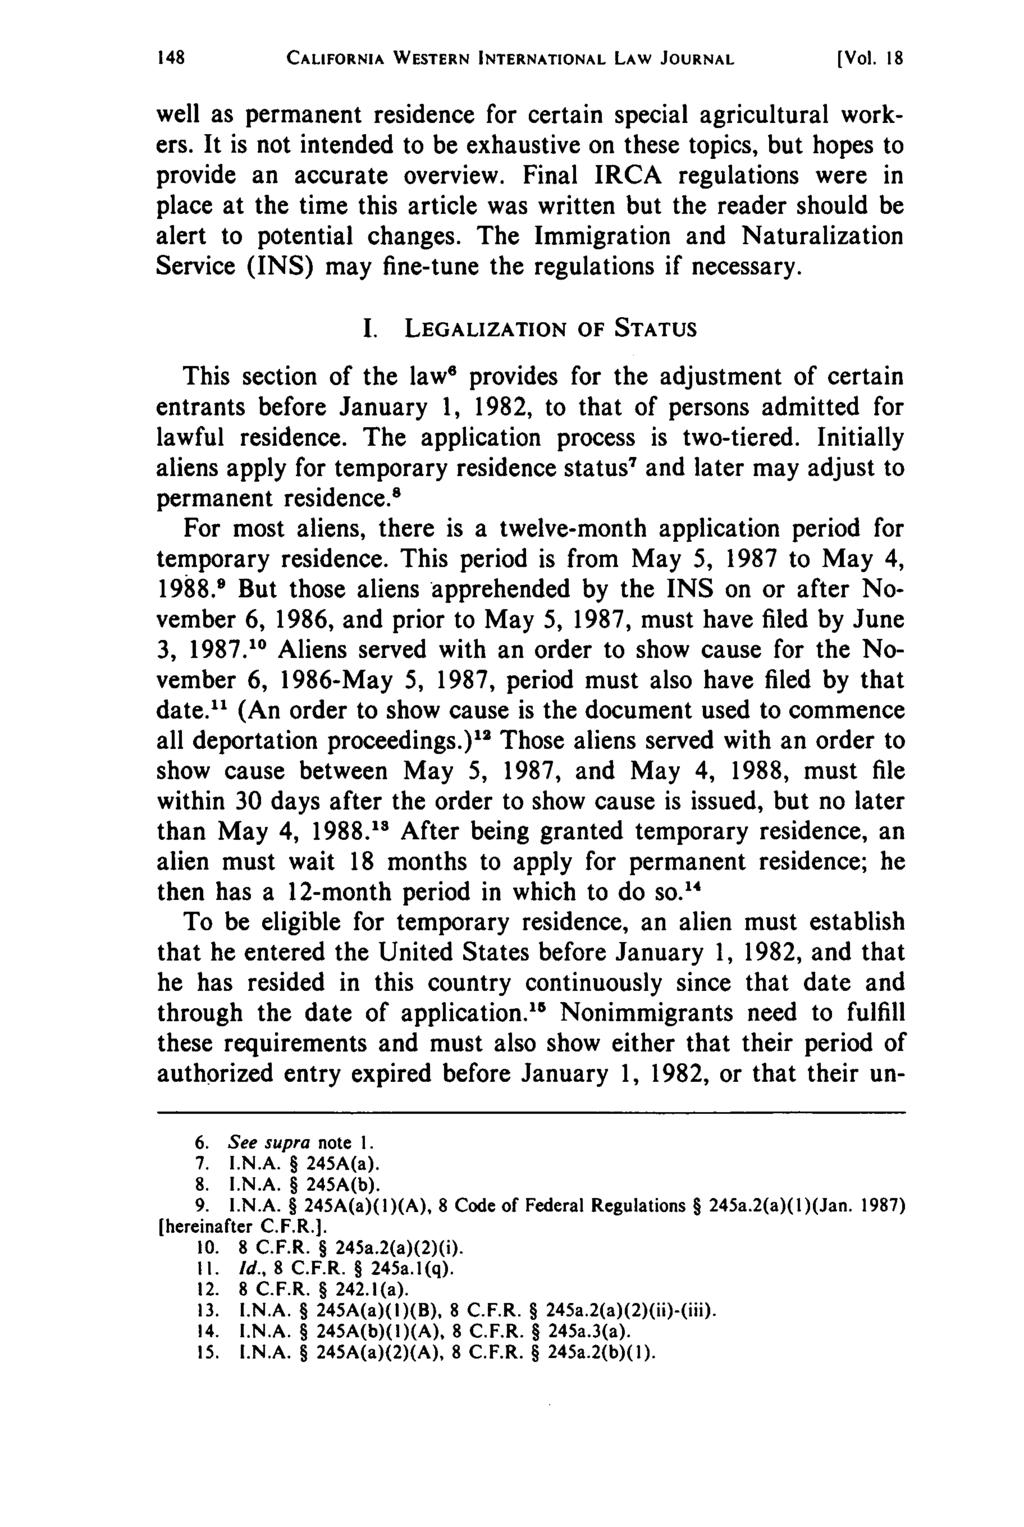 California CALIFORNIA Western International WESTERN Law INTERNATIONAL Journal, Vol. 18 LAW [1987], JOURNAL No. 1, Art. 19 [Vol. 18 well as permanent residence for certain special agricultural workers.